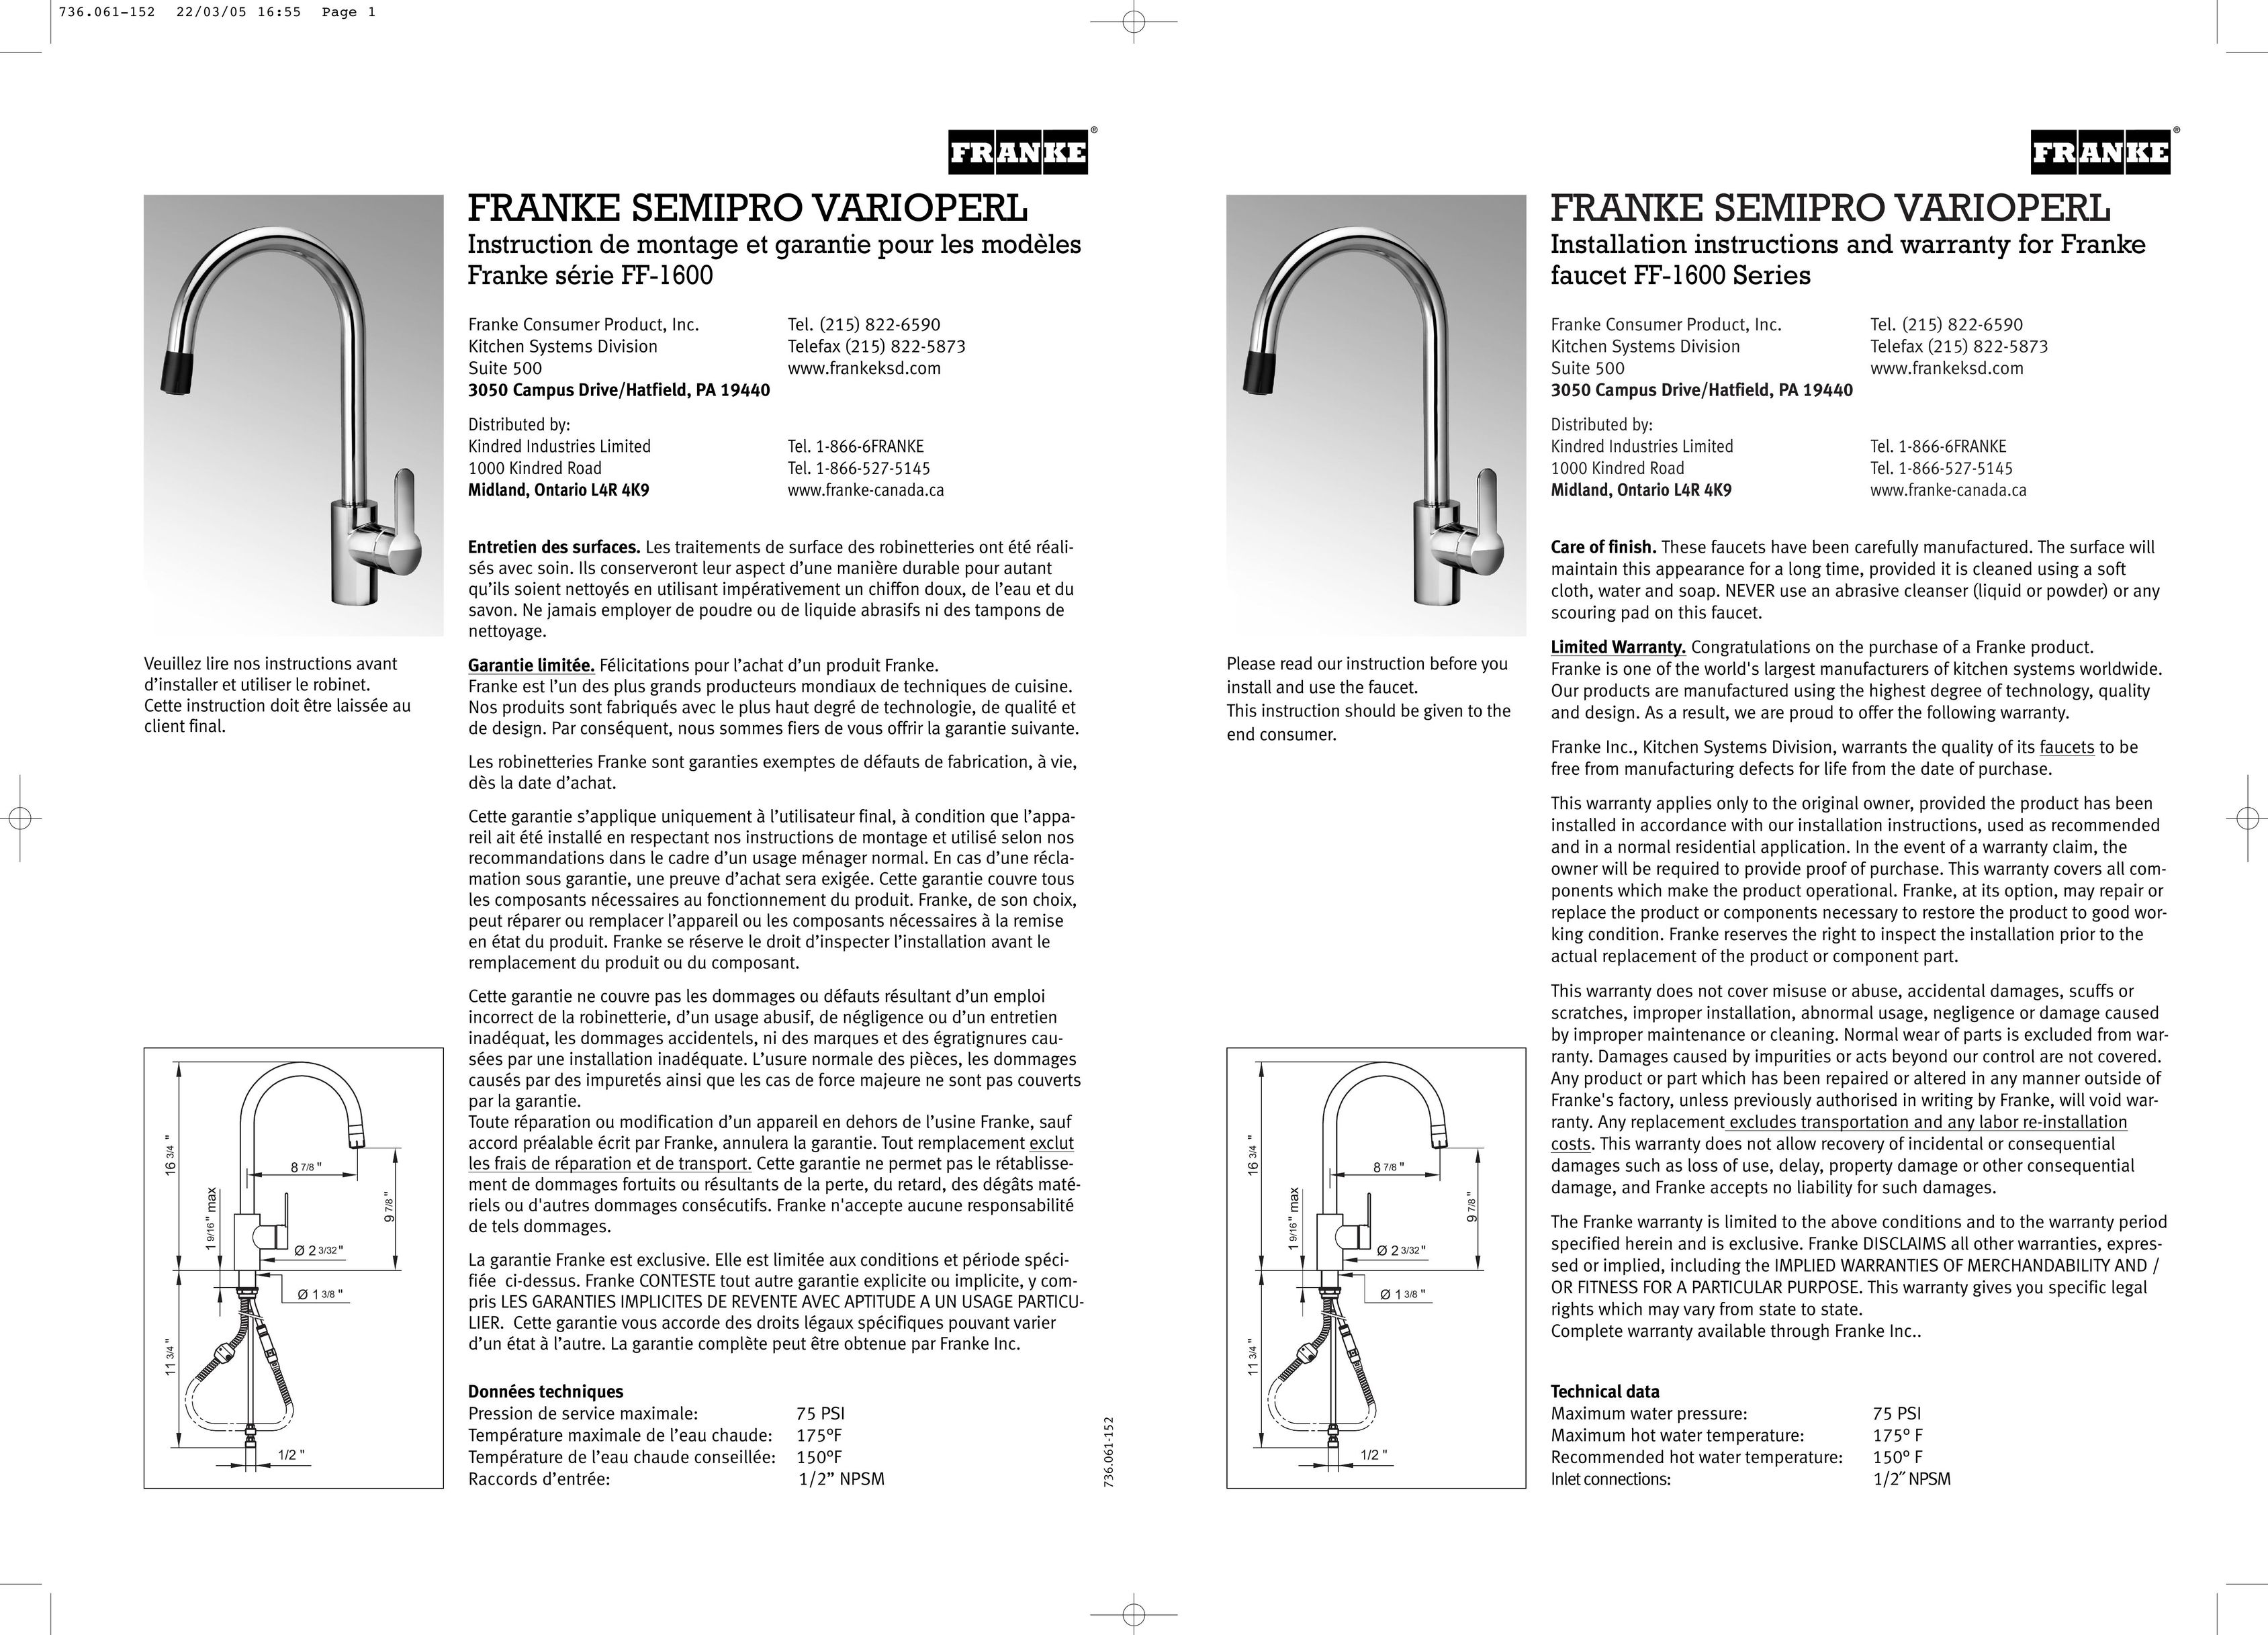 Franke Consumer Products FF-1600 Plumbing Product User Manual